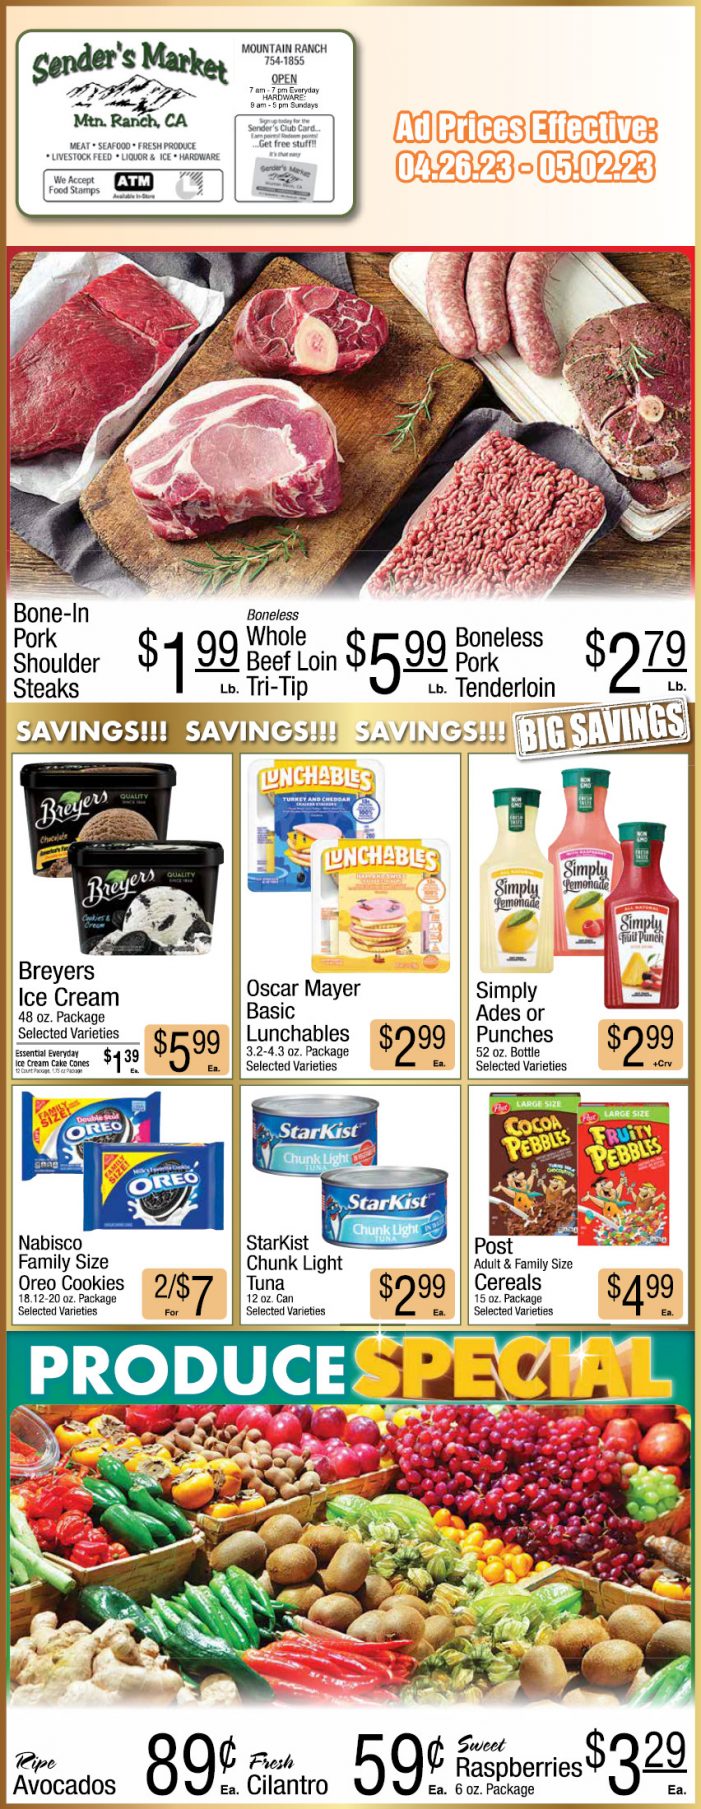 Sender’s Market Weekly Ad & Grocery Specials April 26 – May 2nd!  Shop Local & Save!!